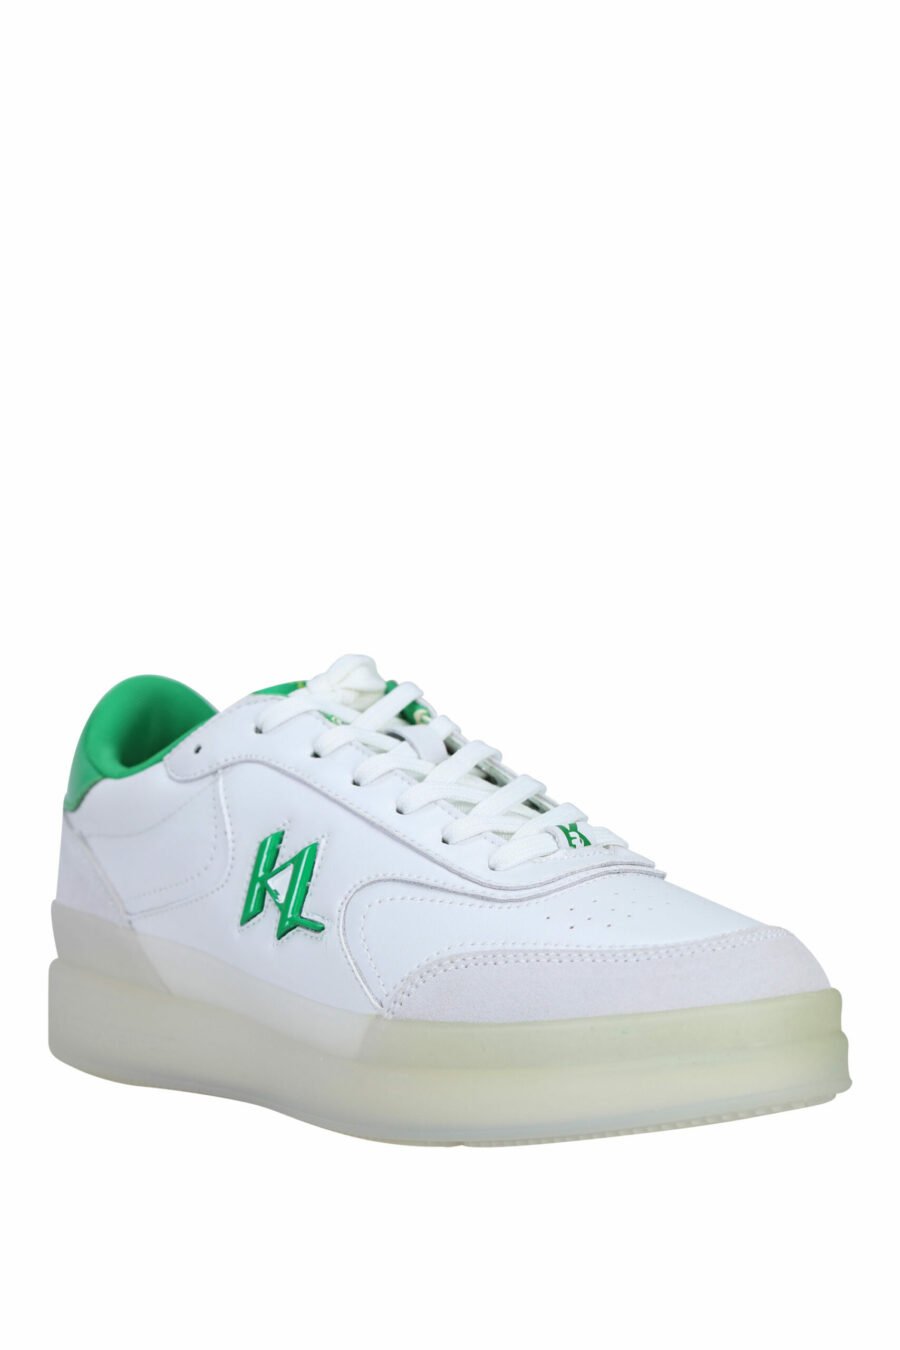 White and grey "brink" trainers with green details - 5059529294495 1 scaled